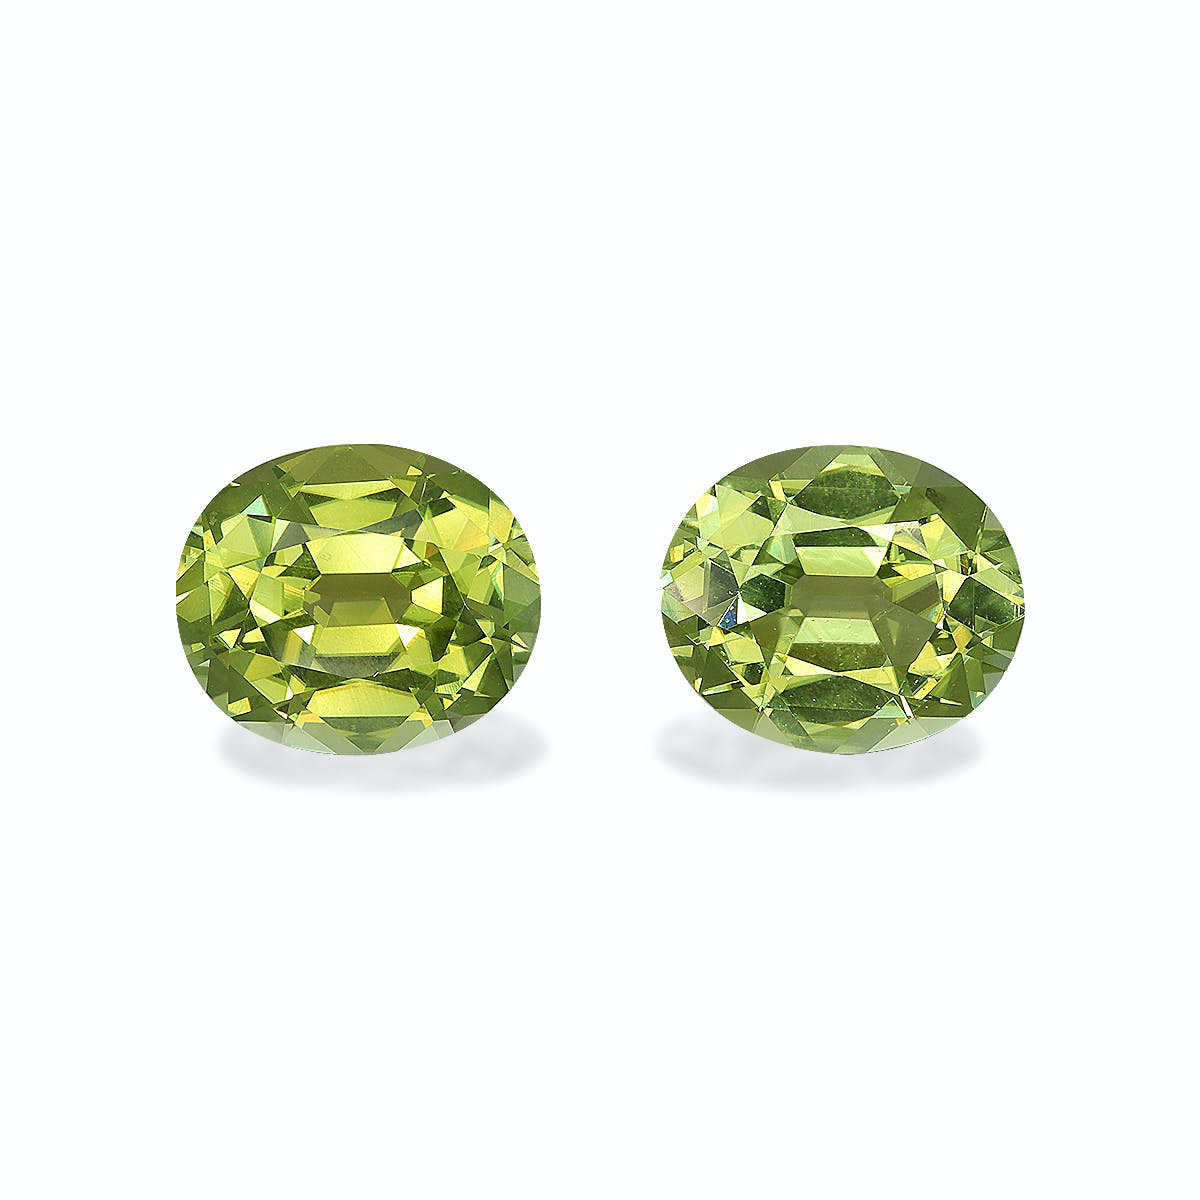 Picture of Lime Green Cuprian Tourmaline 14.73ct - Pair (MZ0248)